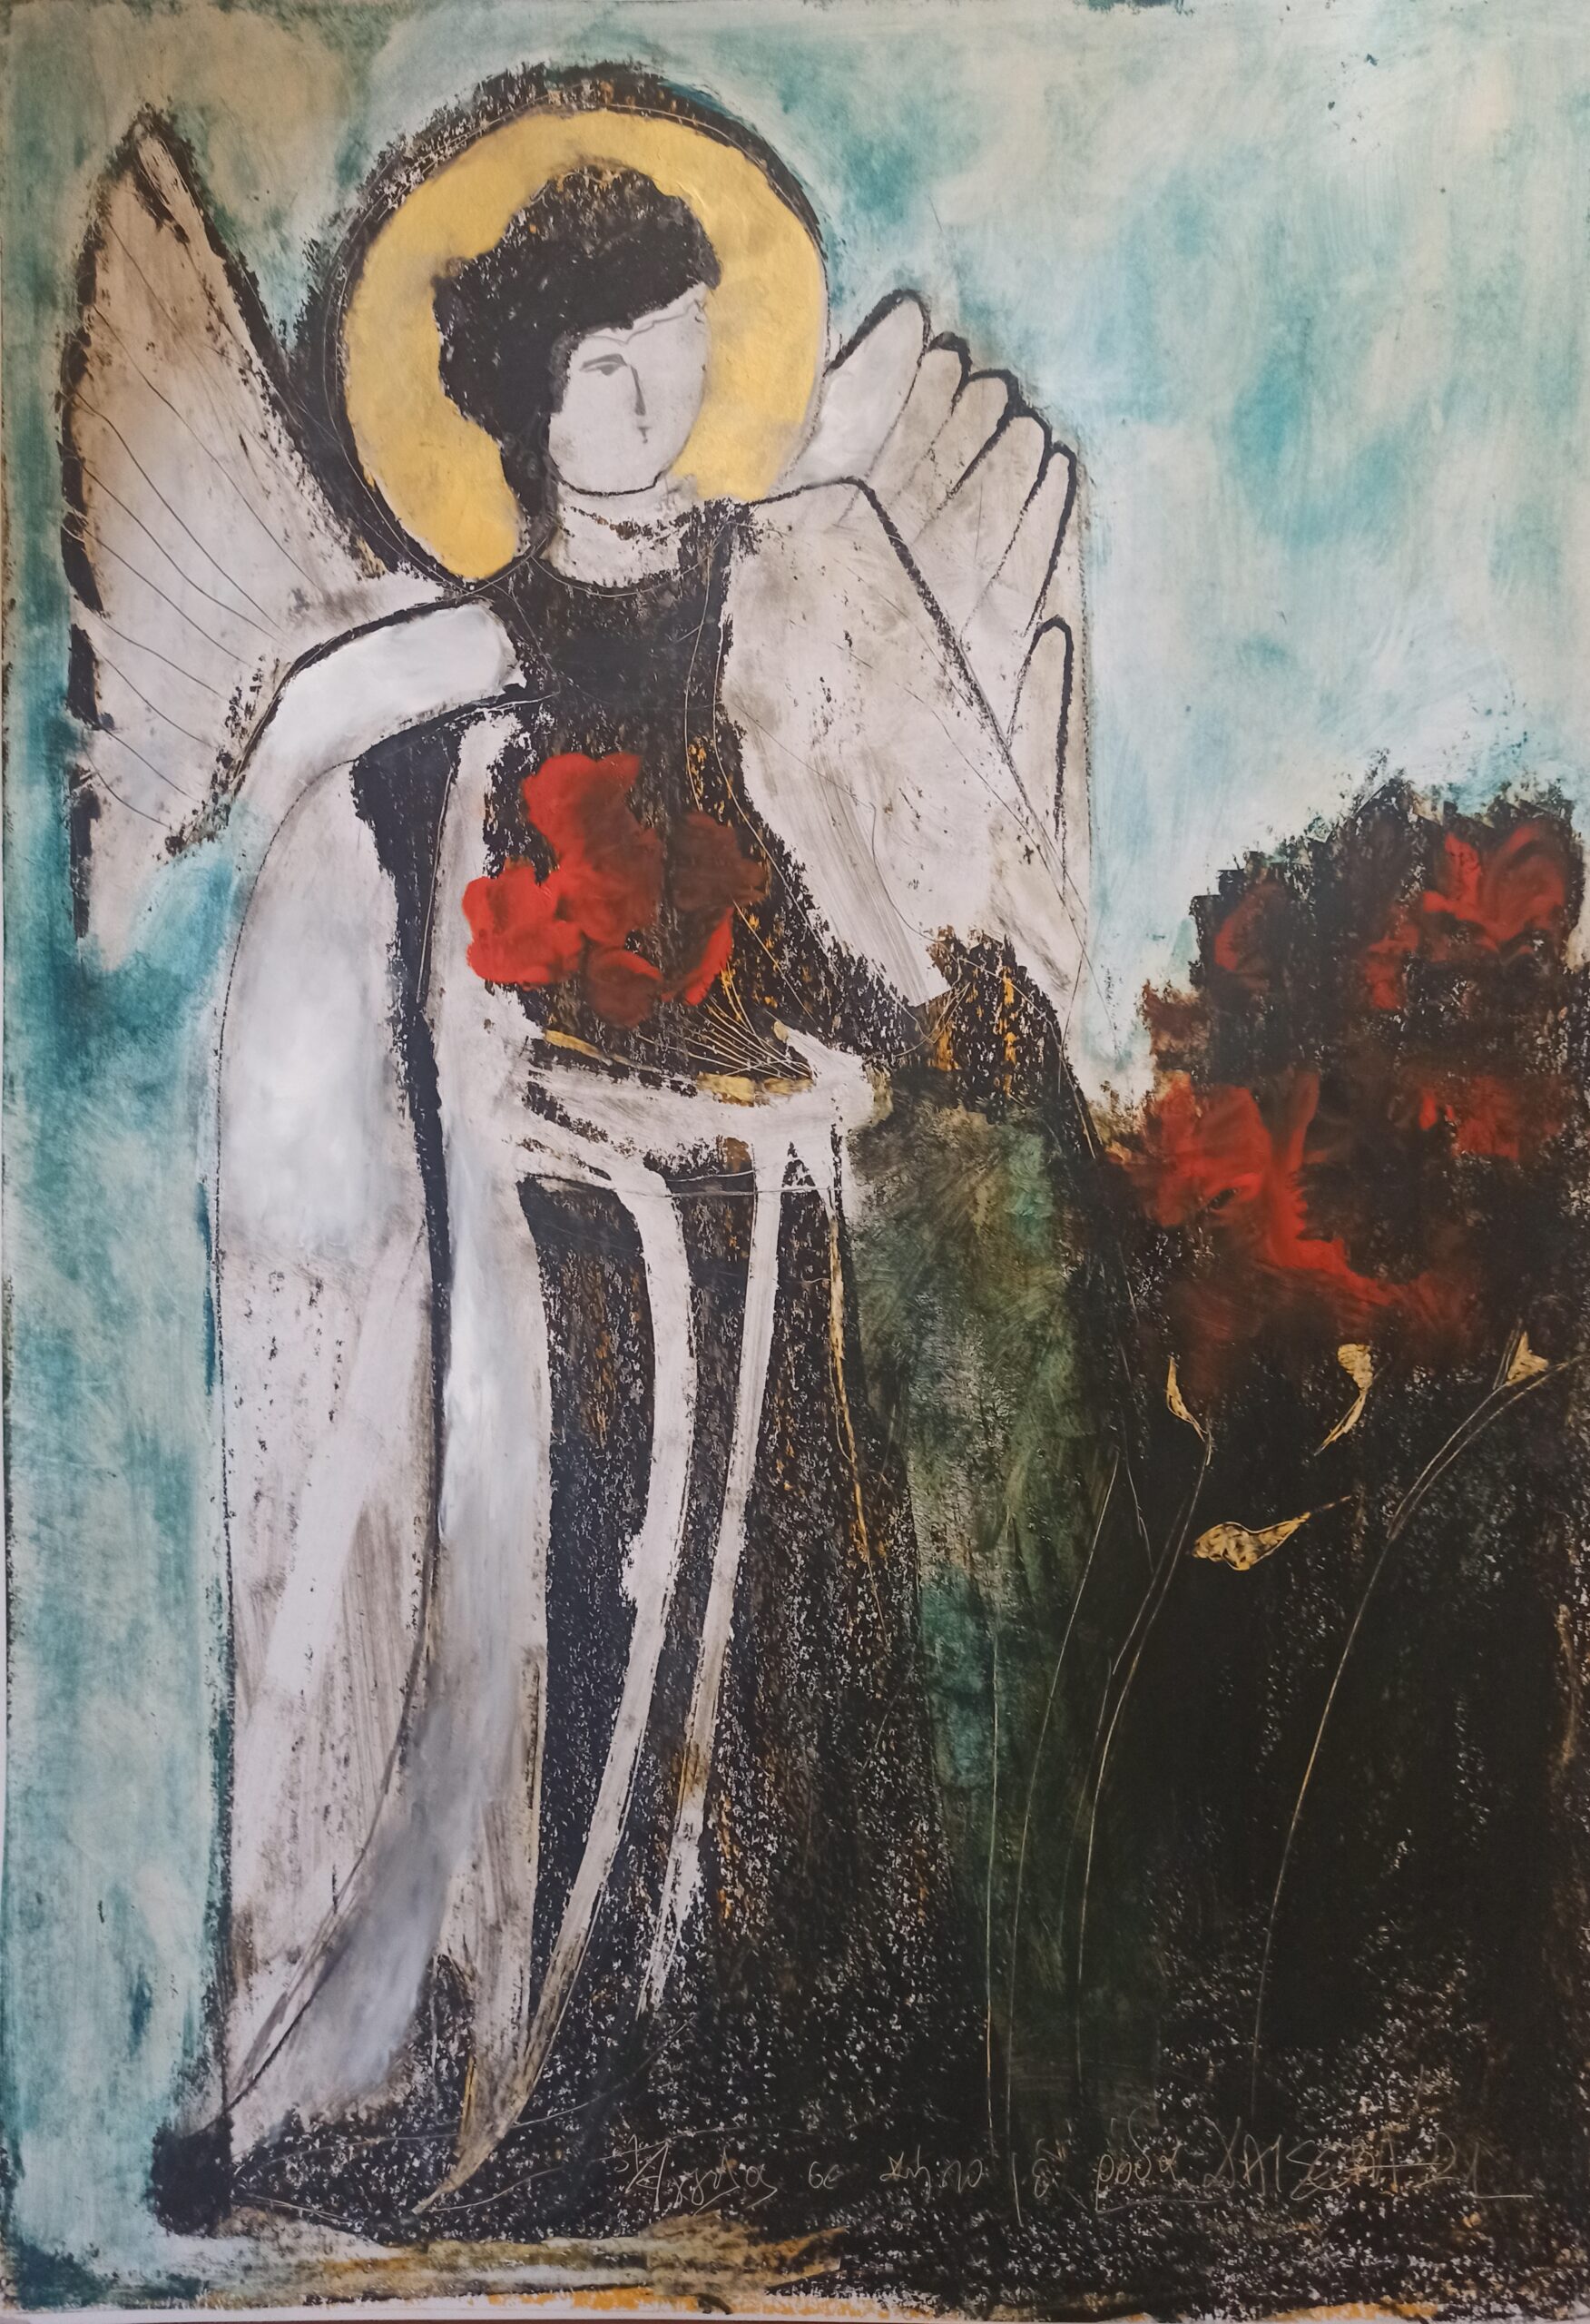 Angel in a garden with roses, 70x100, mixed media on cardboard, 2021, 180 euro